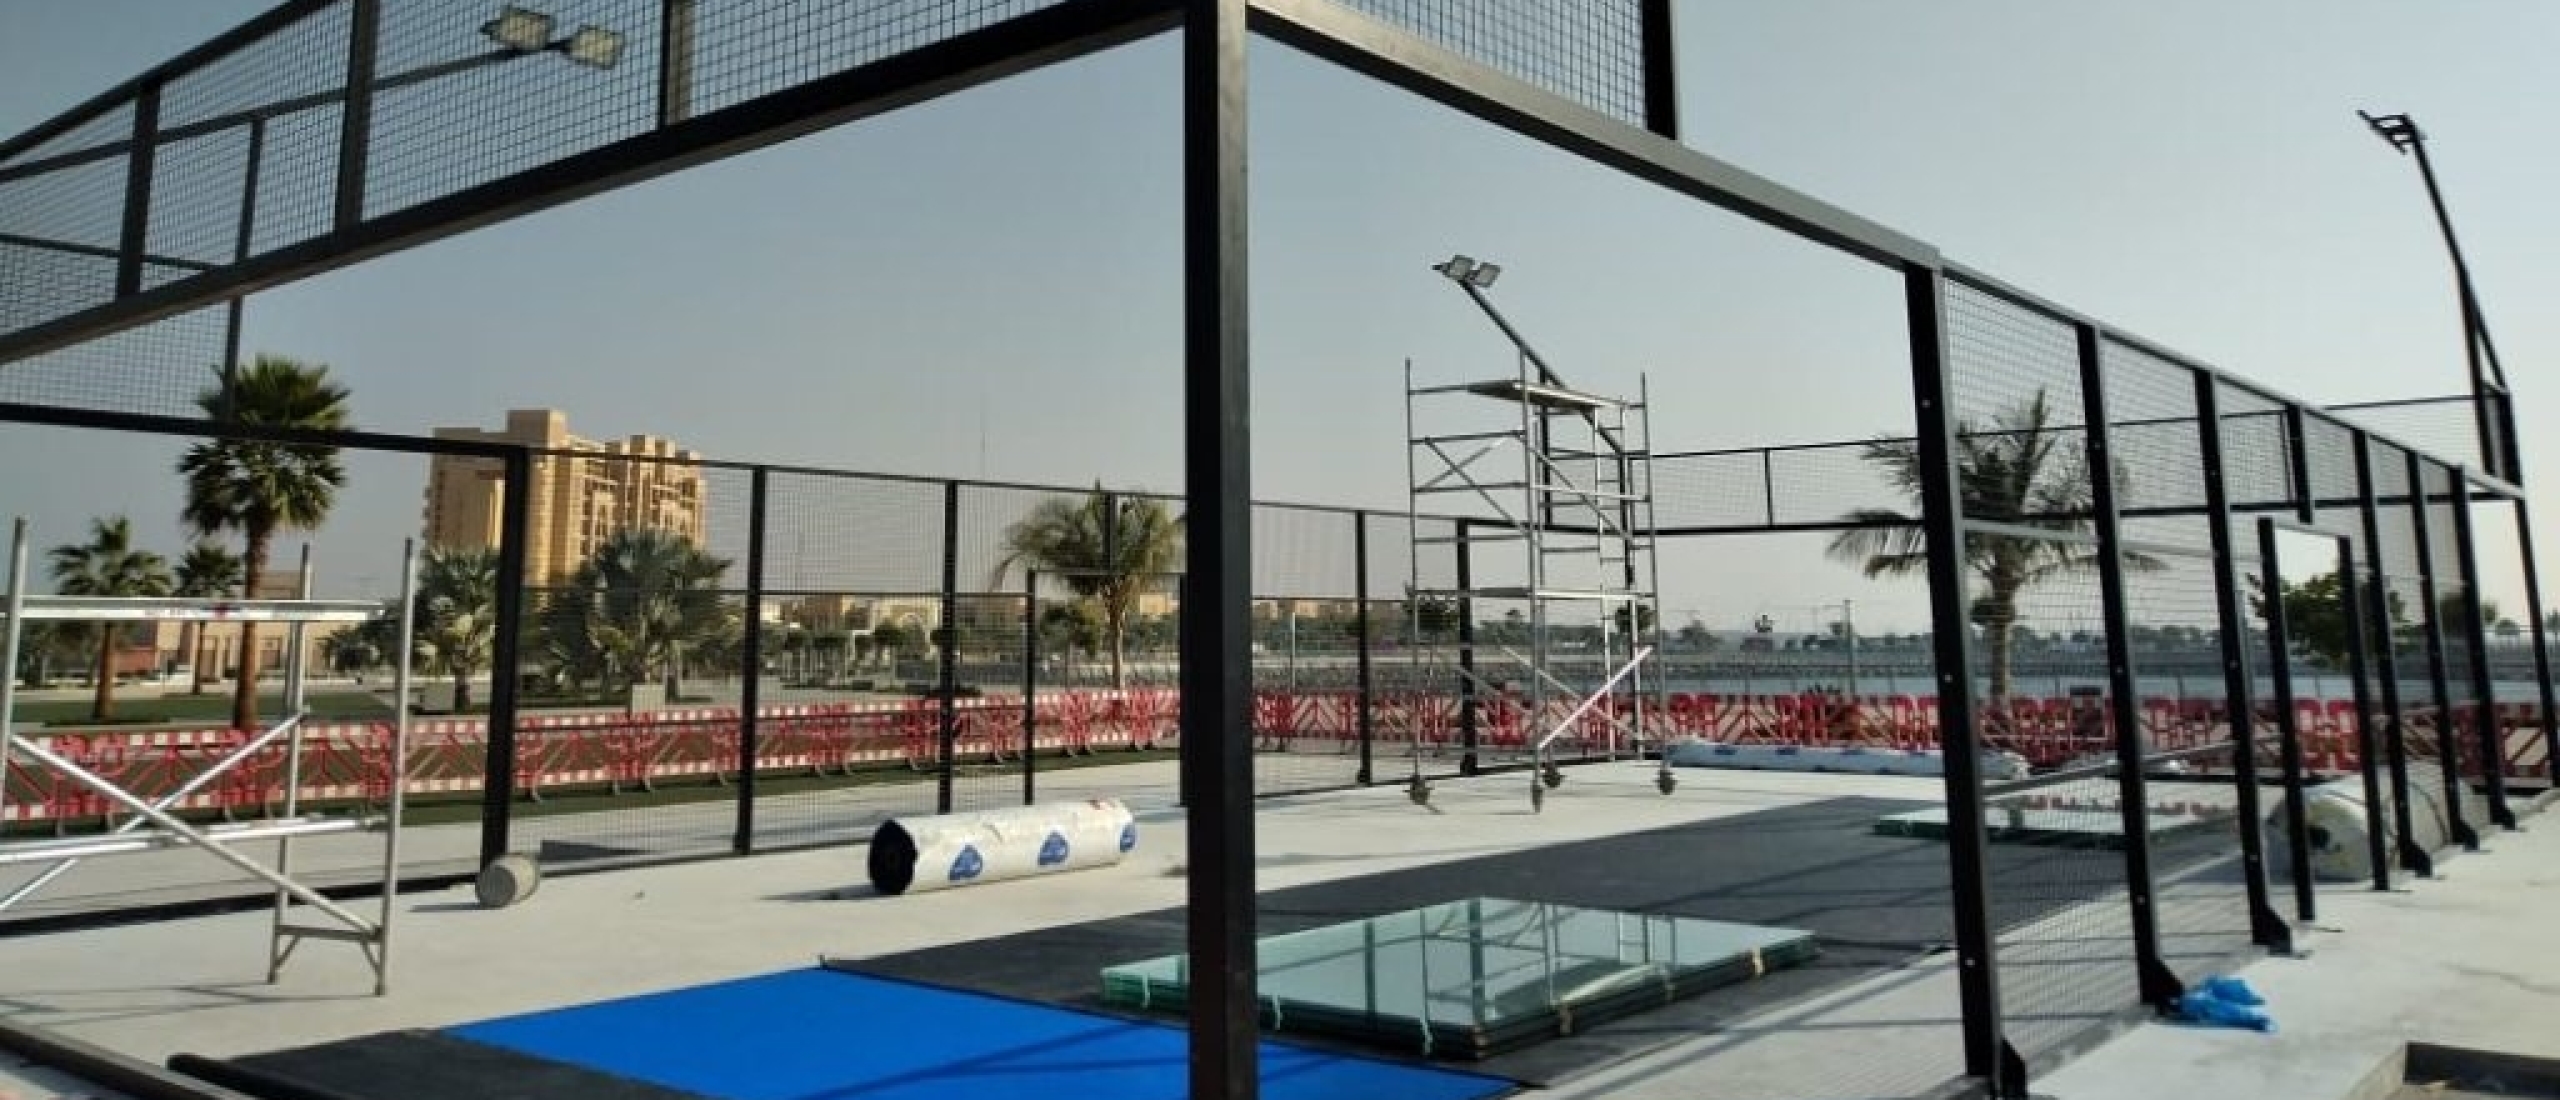 Building padel courts